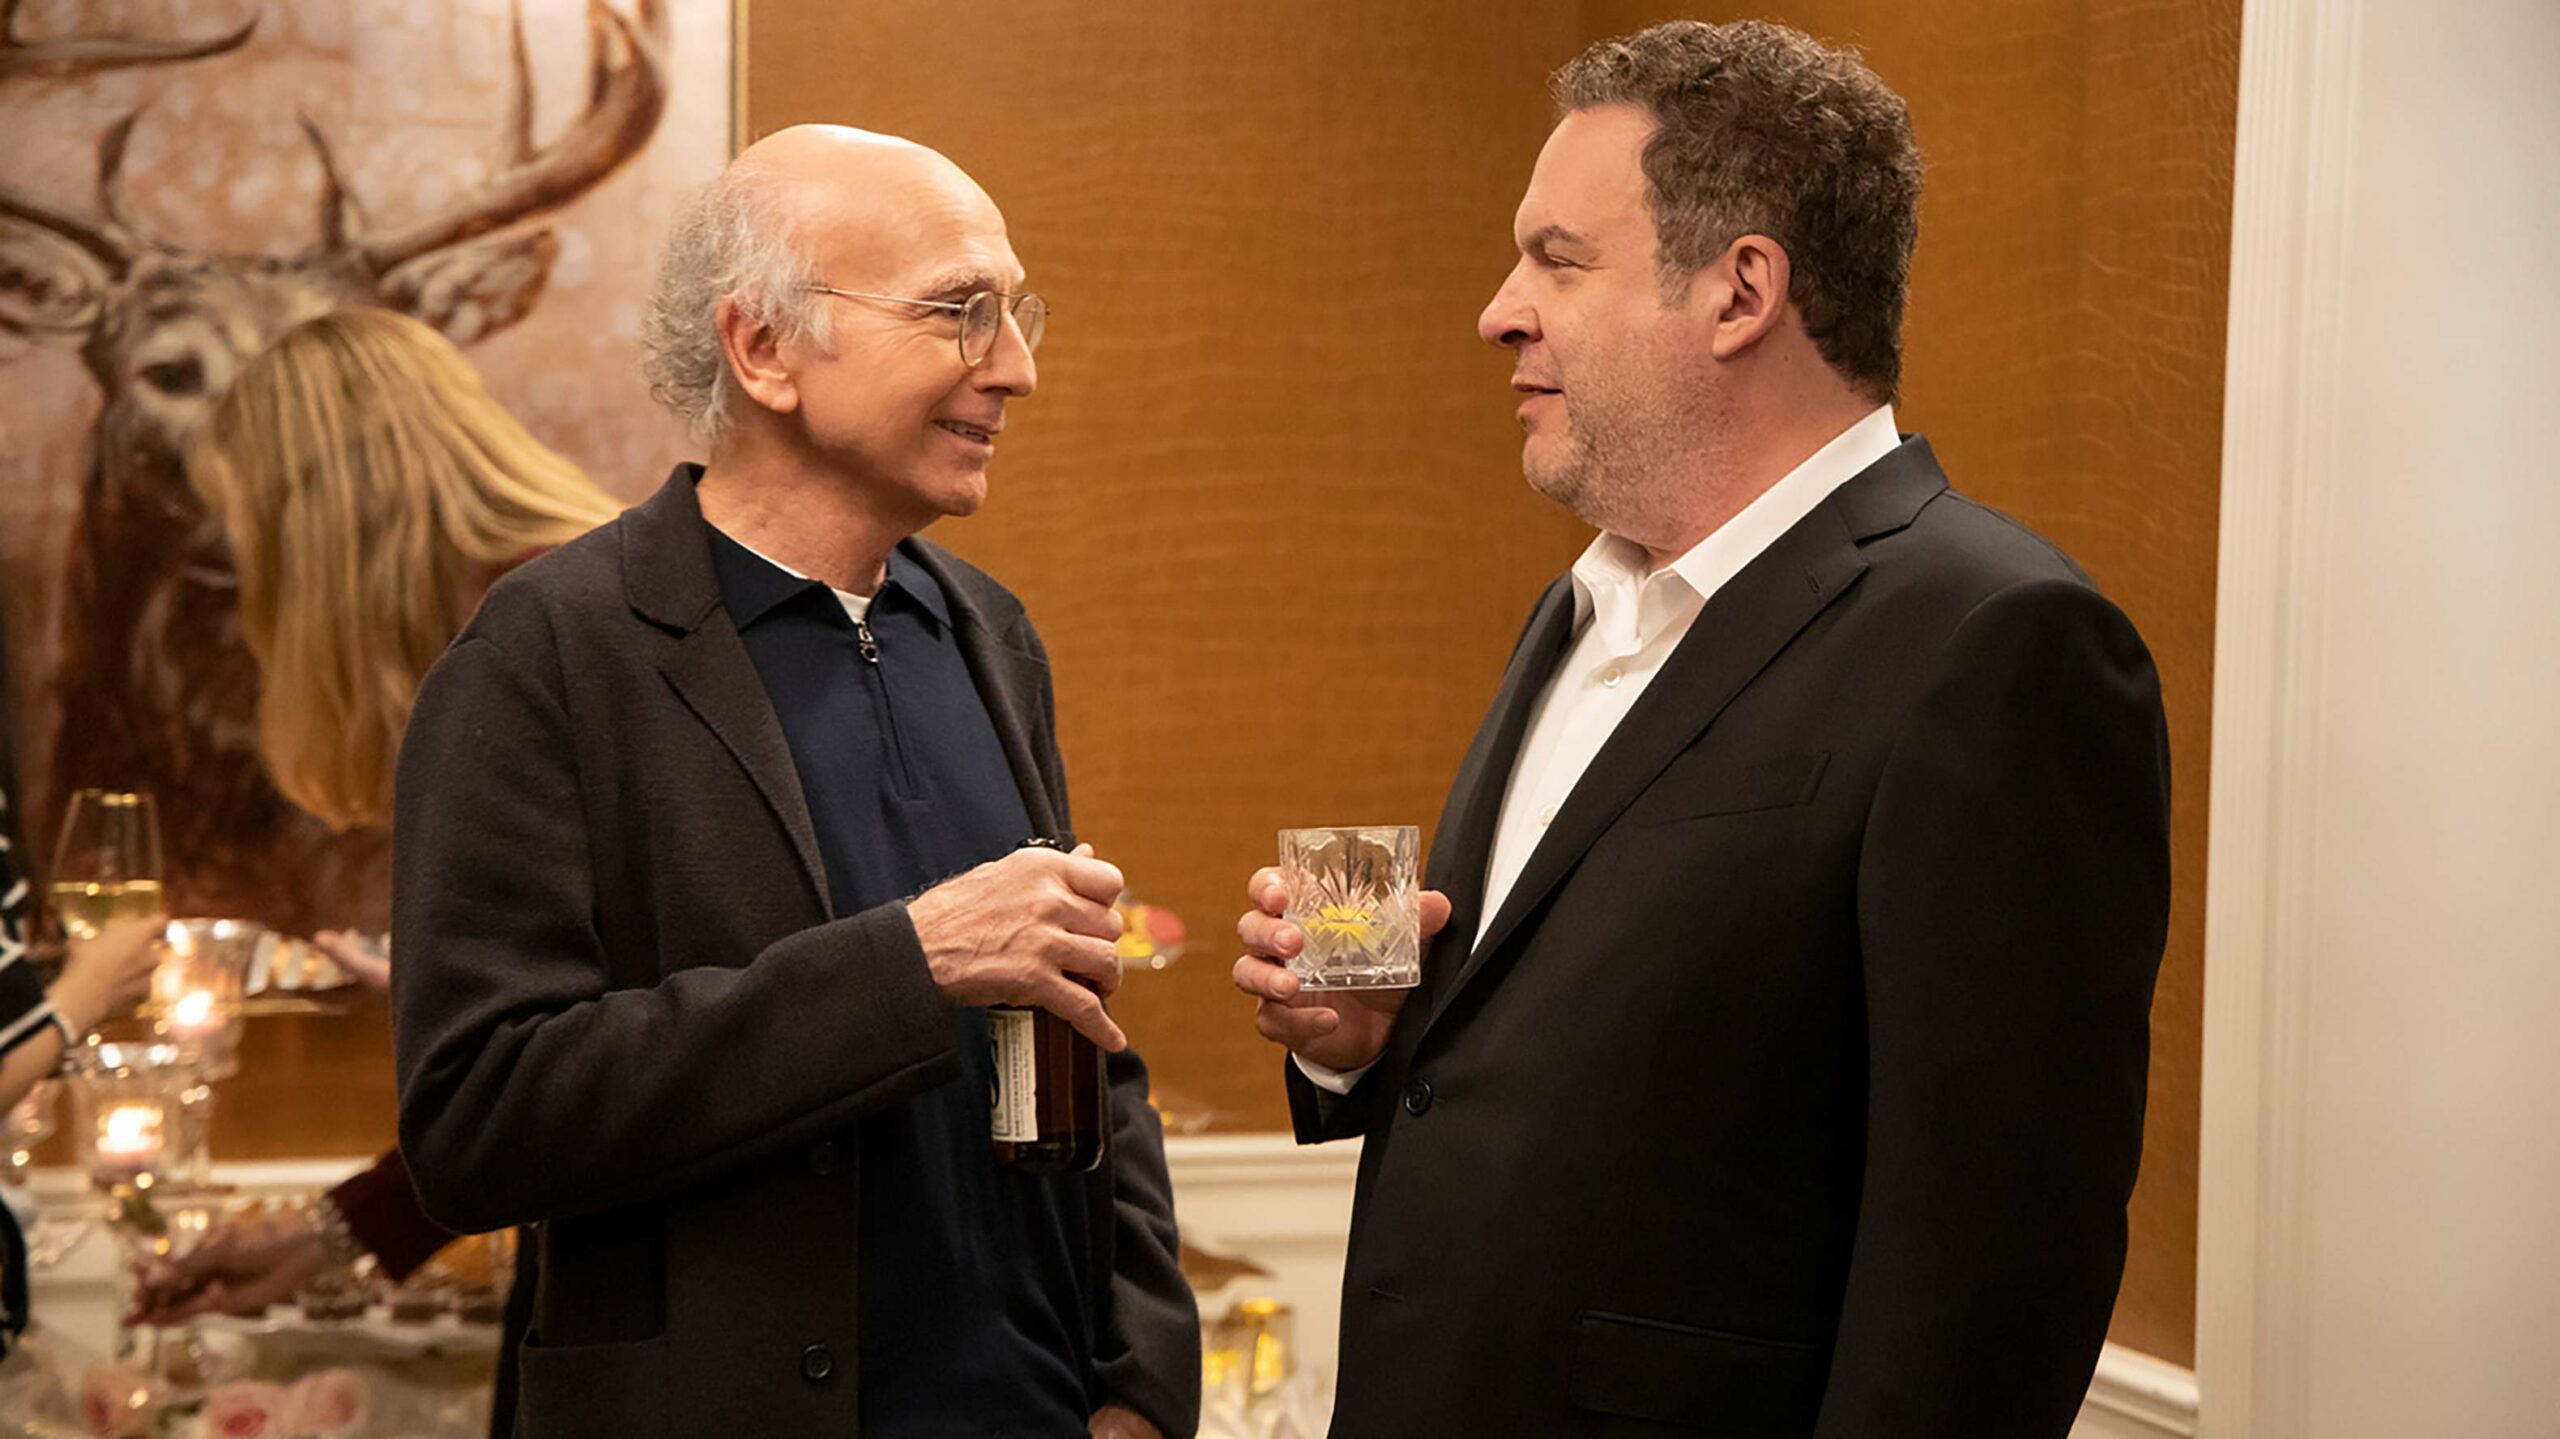 Curb Your Enthusiasm Larry David and Jeff Garlin